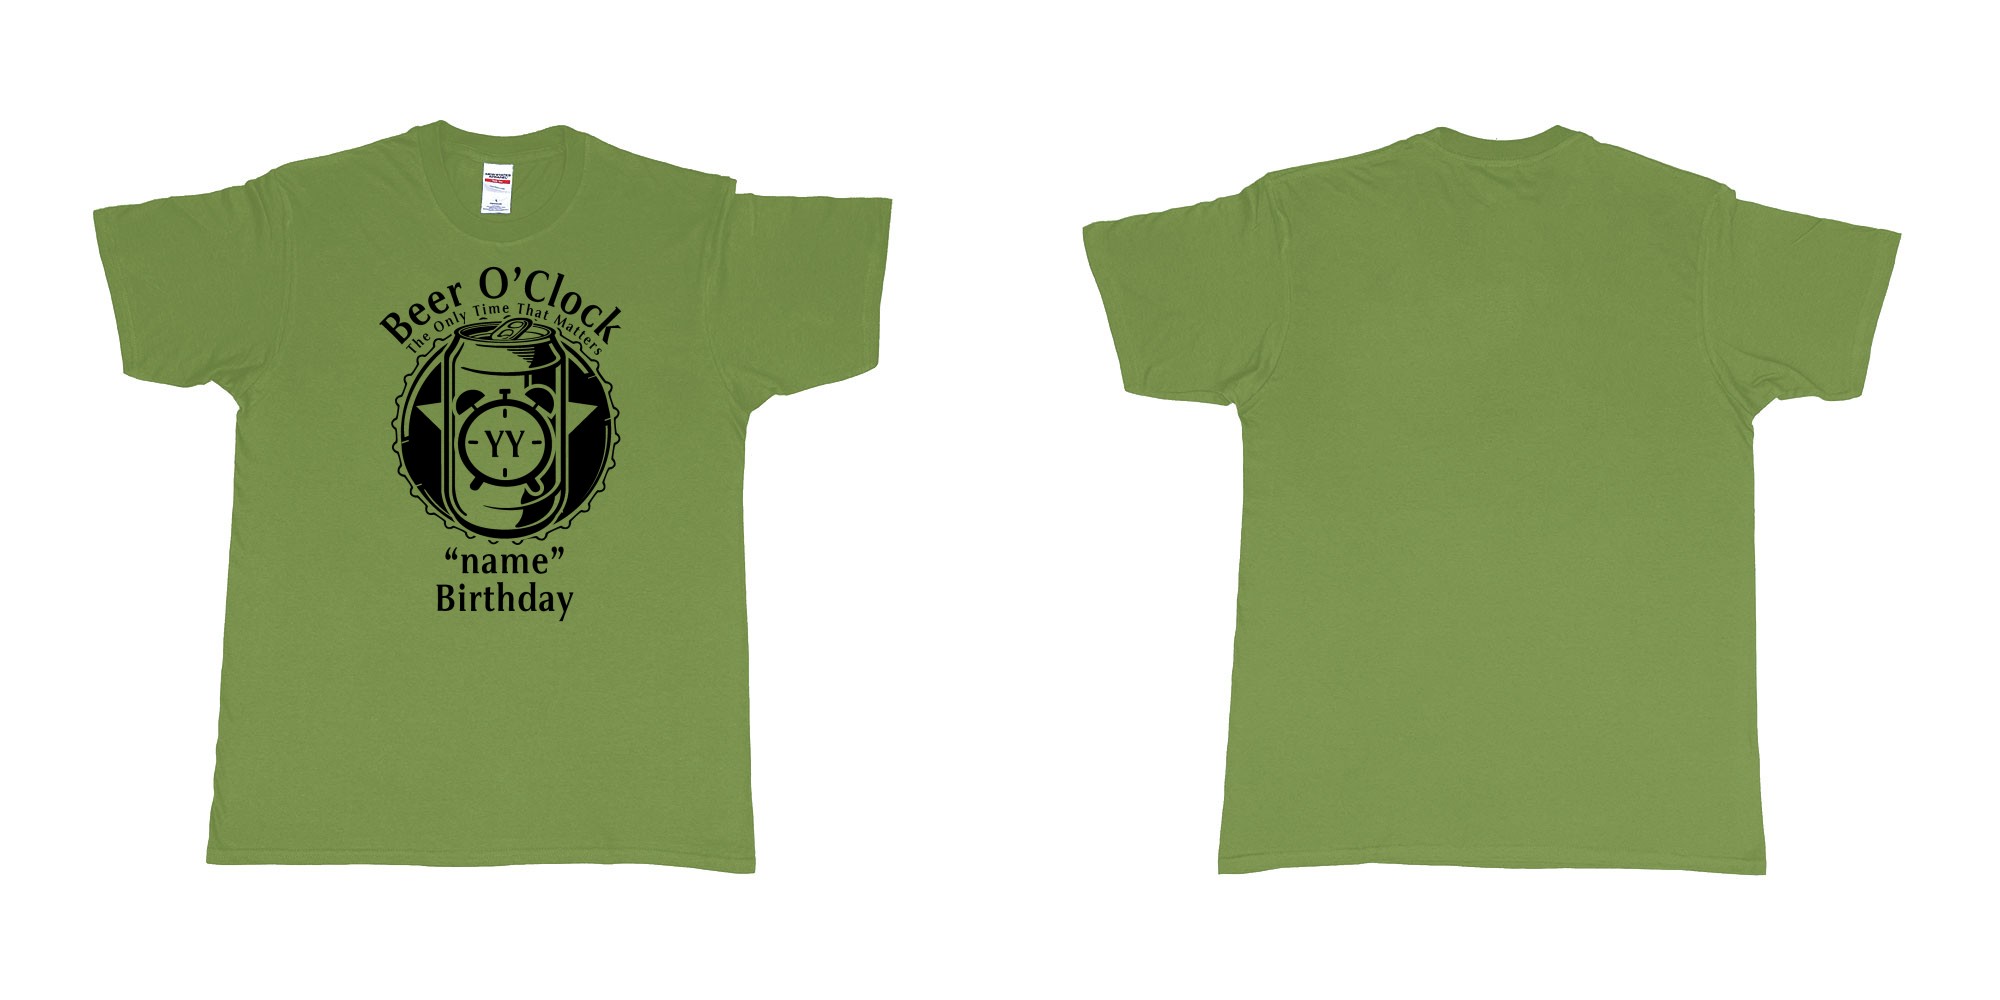 Custom tshirt design beer oclock the only time that matters custom year and names birthday bali in fabric color military-green choice your own text made in Bali by The Pirate Way